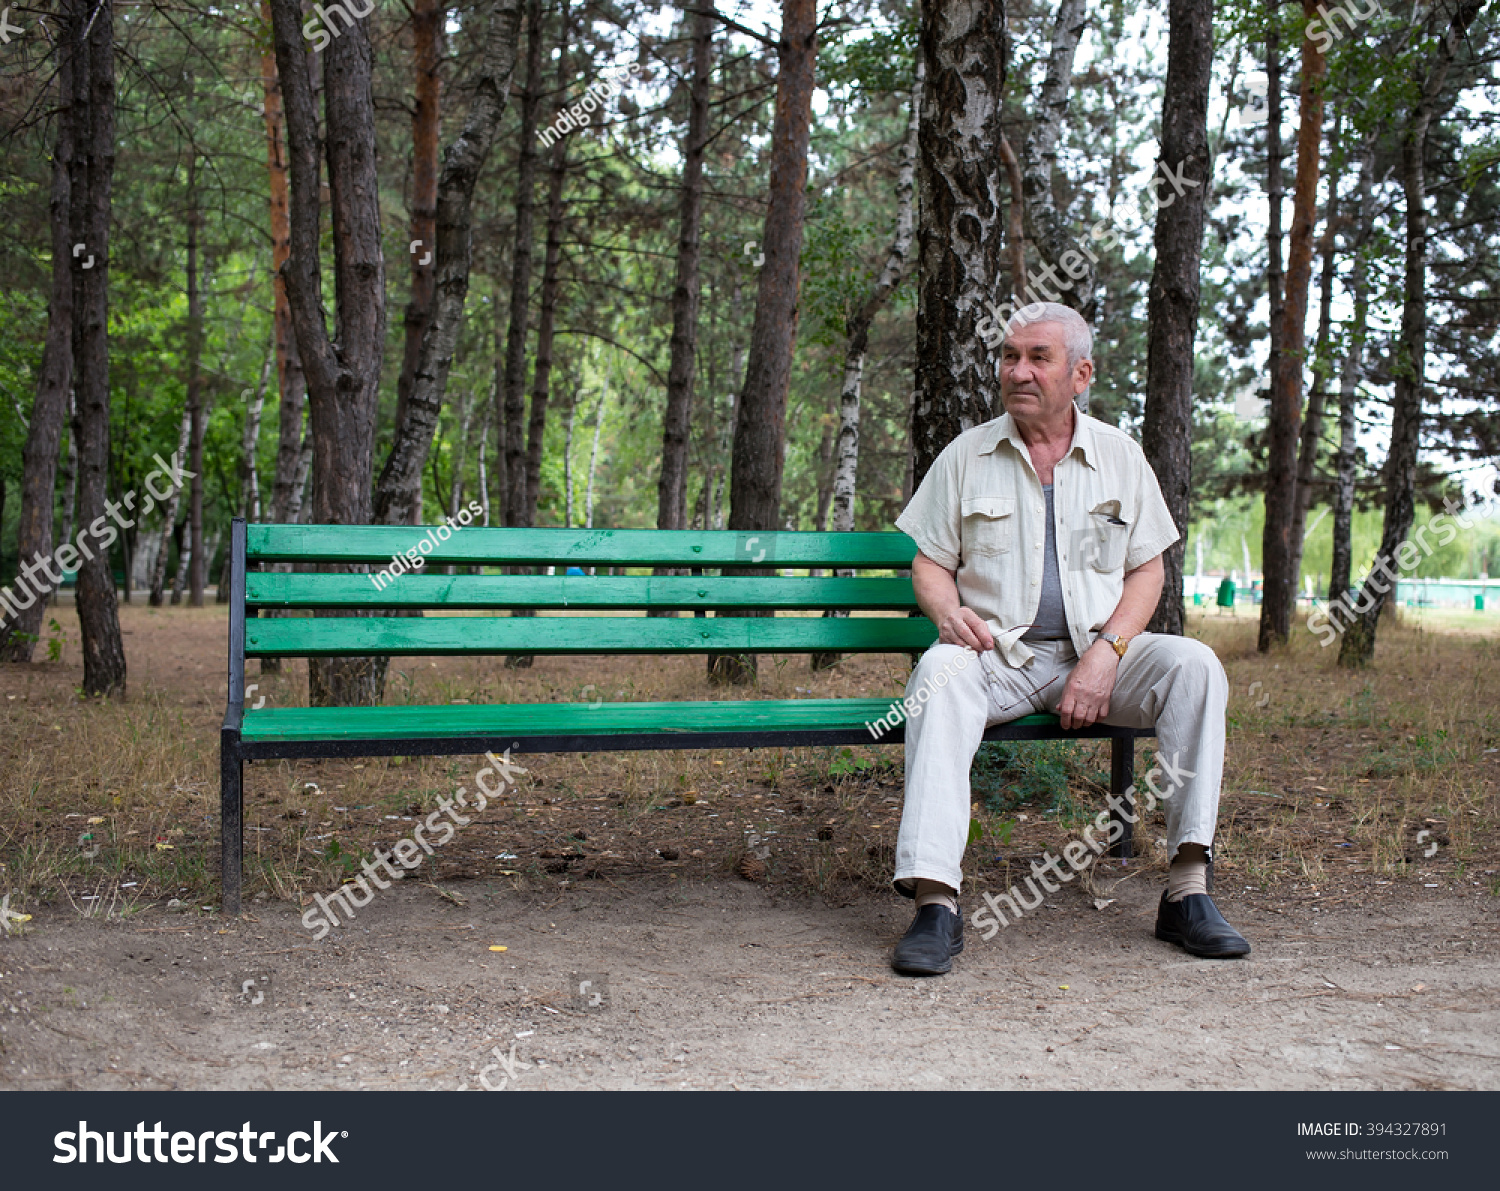 Old man sitting on the bench in park against trees as a background. #394327891